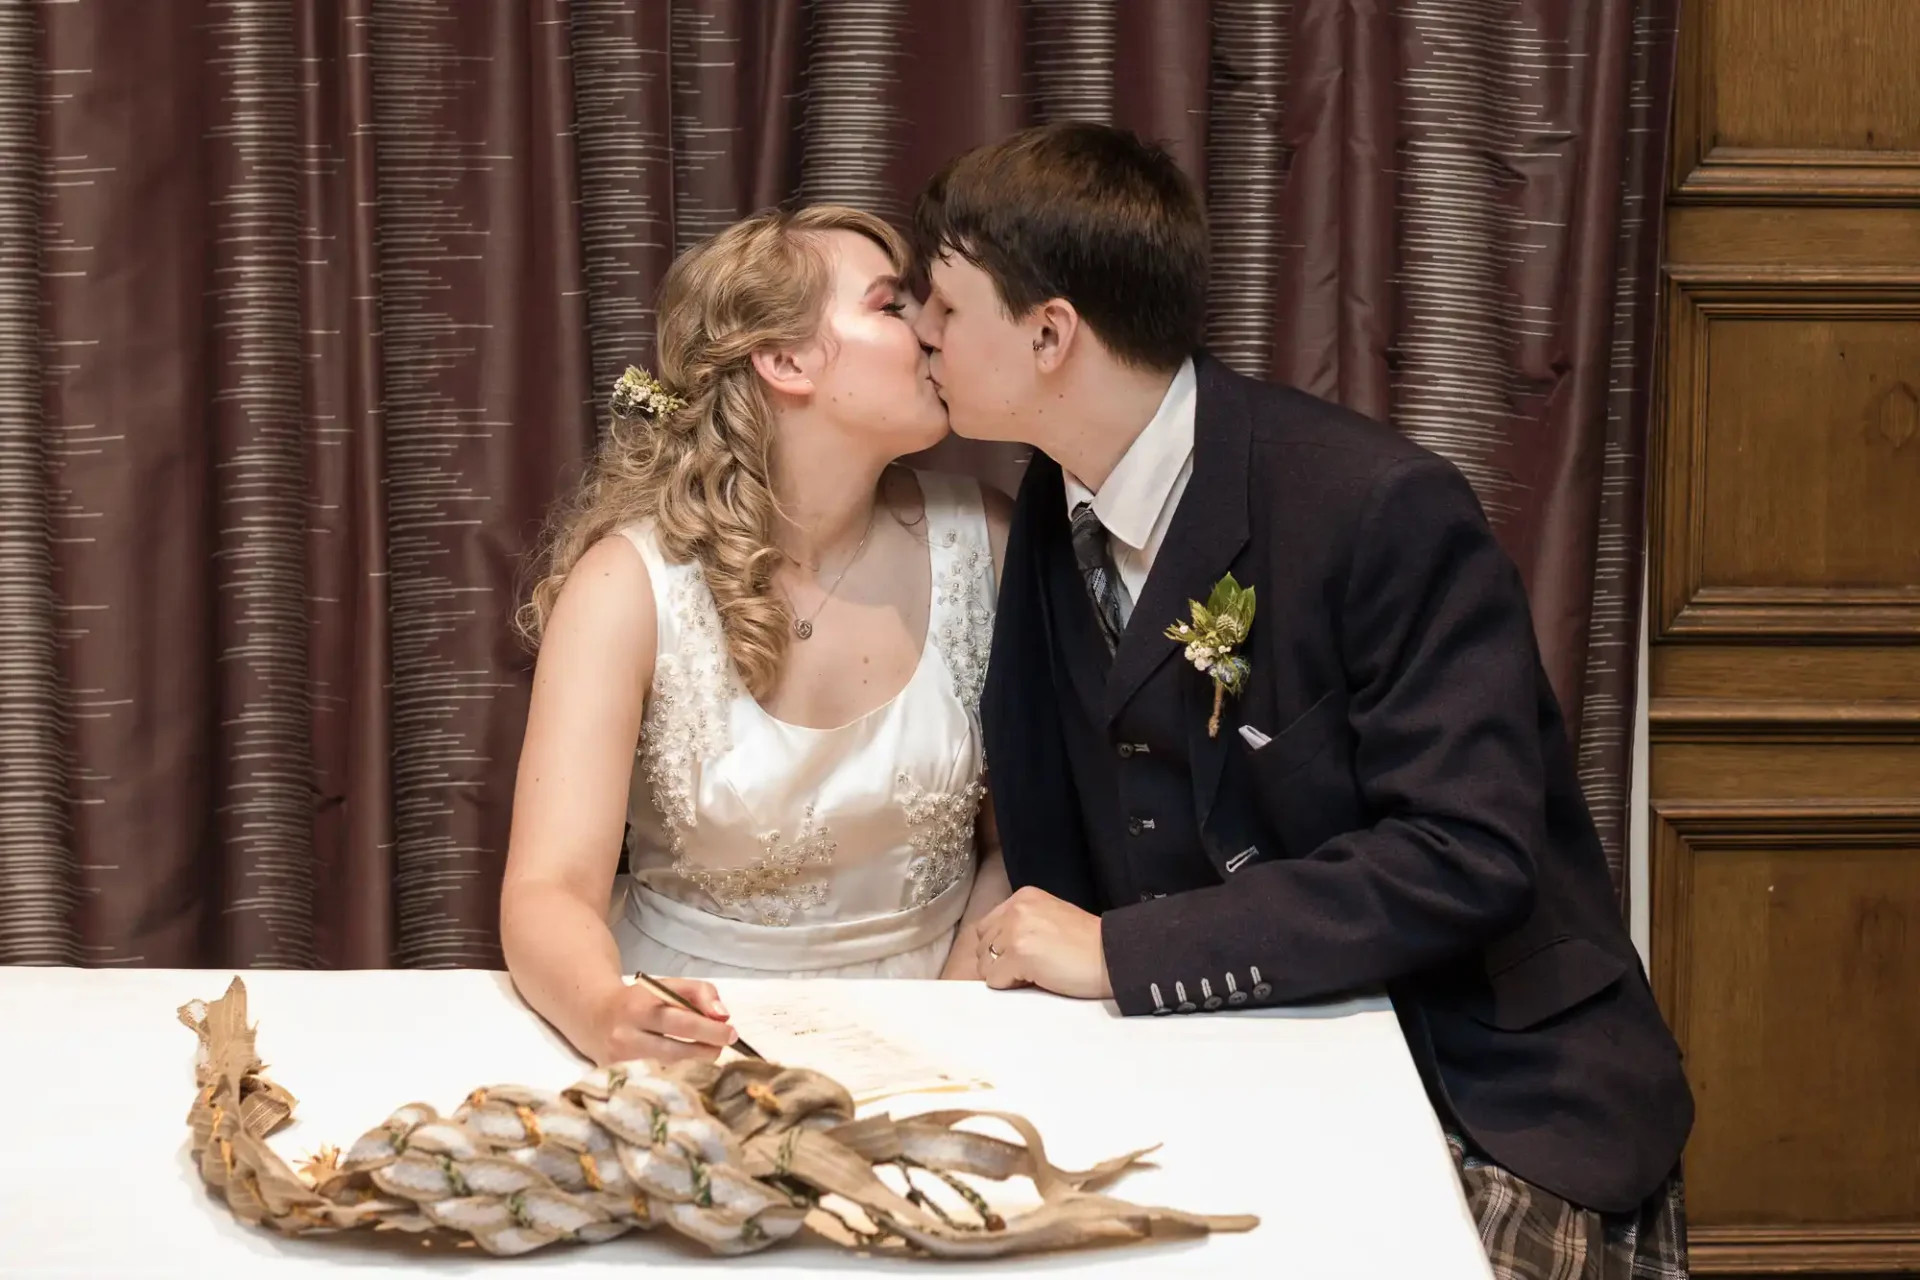 A bride and groom kissing at a signing table with a feather quill on it, in a room with wooden paneling and curtains.